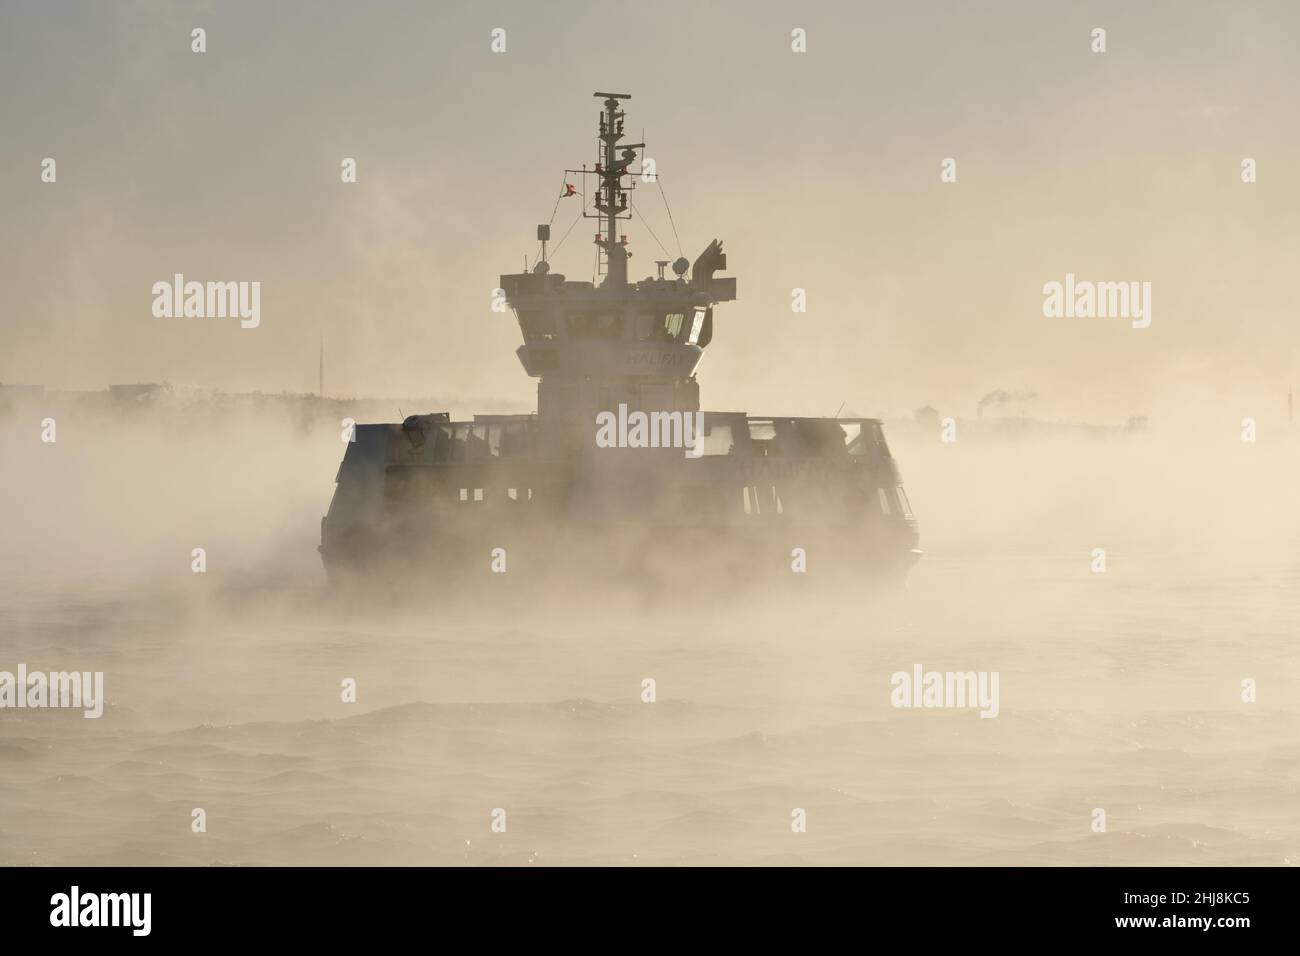 Halifax, Nova Scotia, Canada. January 27th, 2022. As a cold front hits the city overnight, with real feel temperature dropping to -25C, steam fog rises from the harbour early this morning. The Alderny Ferry pulls up into the Halifax station lost in the winter fog. Credit: meanderingemu/Alamy Live News Stock Photo